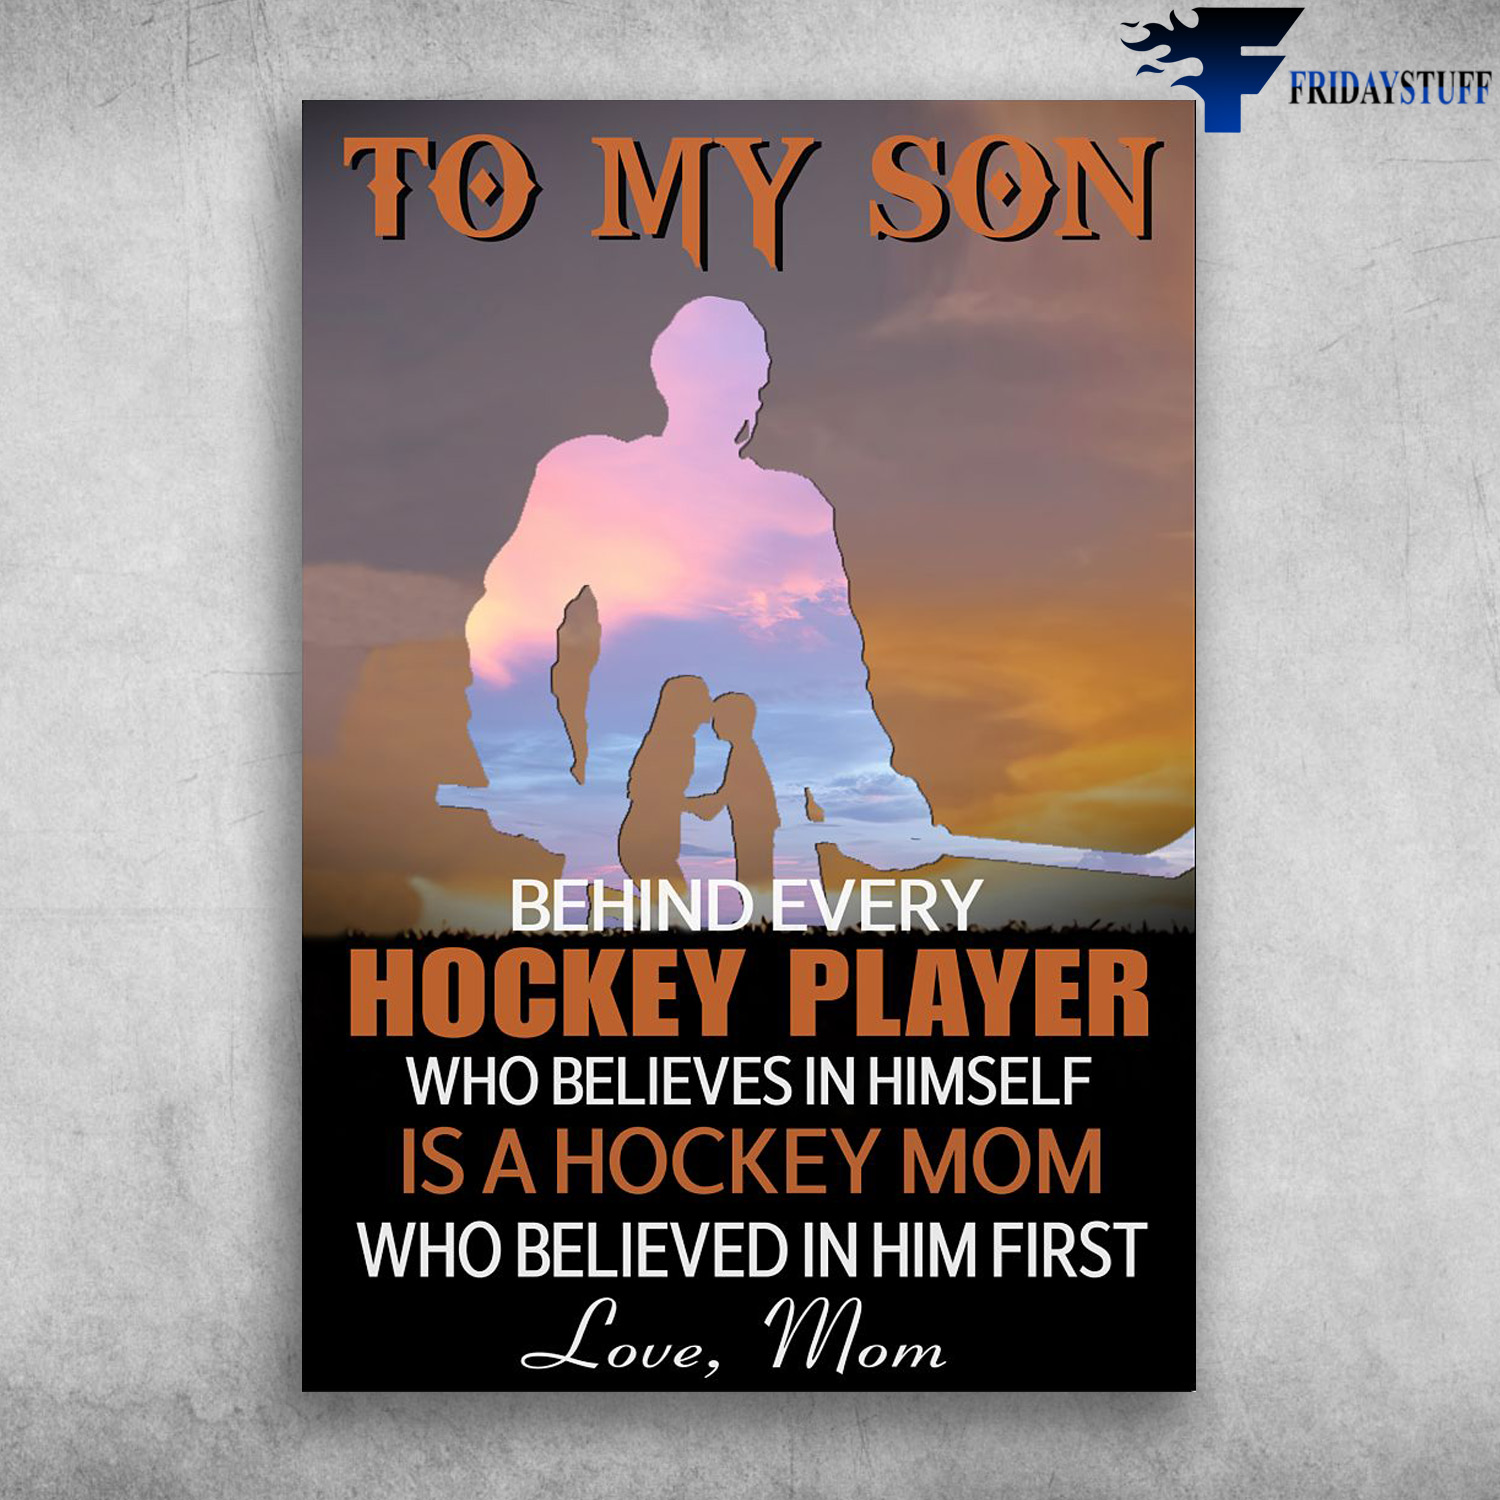 Mom And Son, Hockey Player - To My Son, Behind Every Hockey Player, Who Believes In Himself, Is A Hokey Mom, Who Believed In Him First, Love Mom